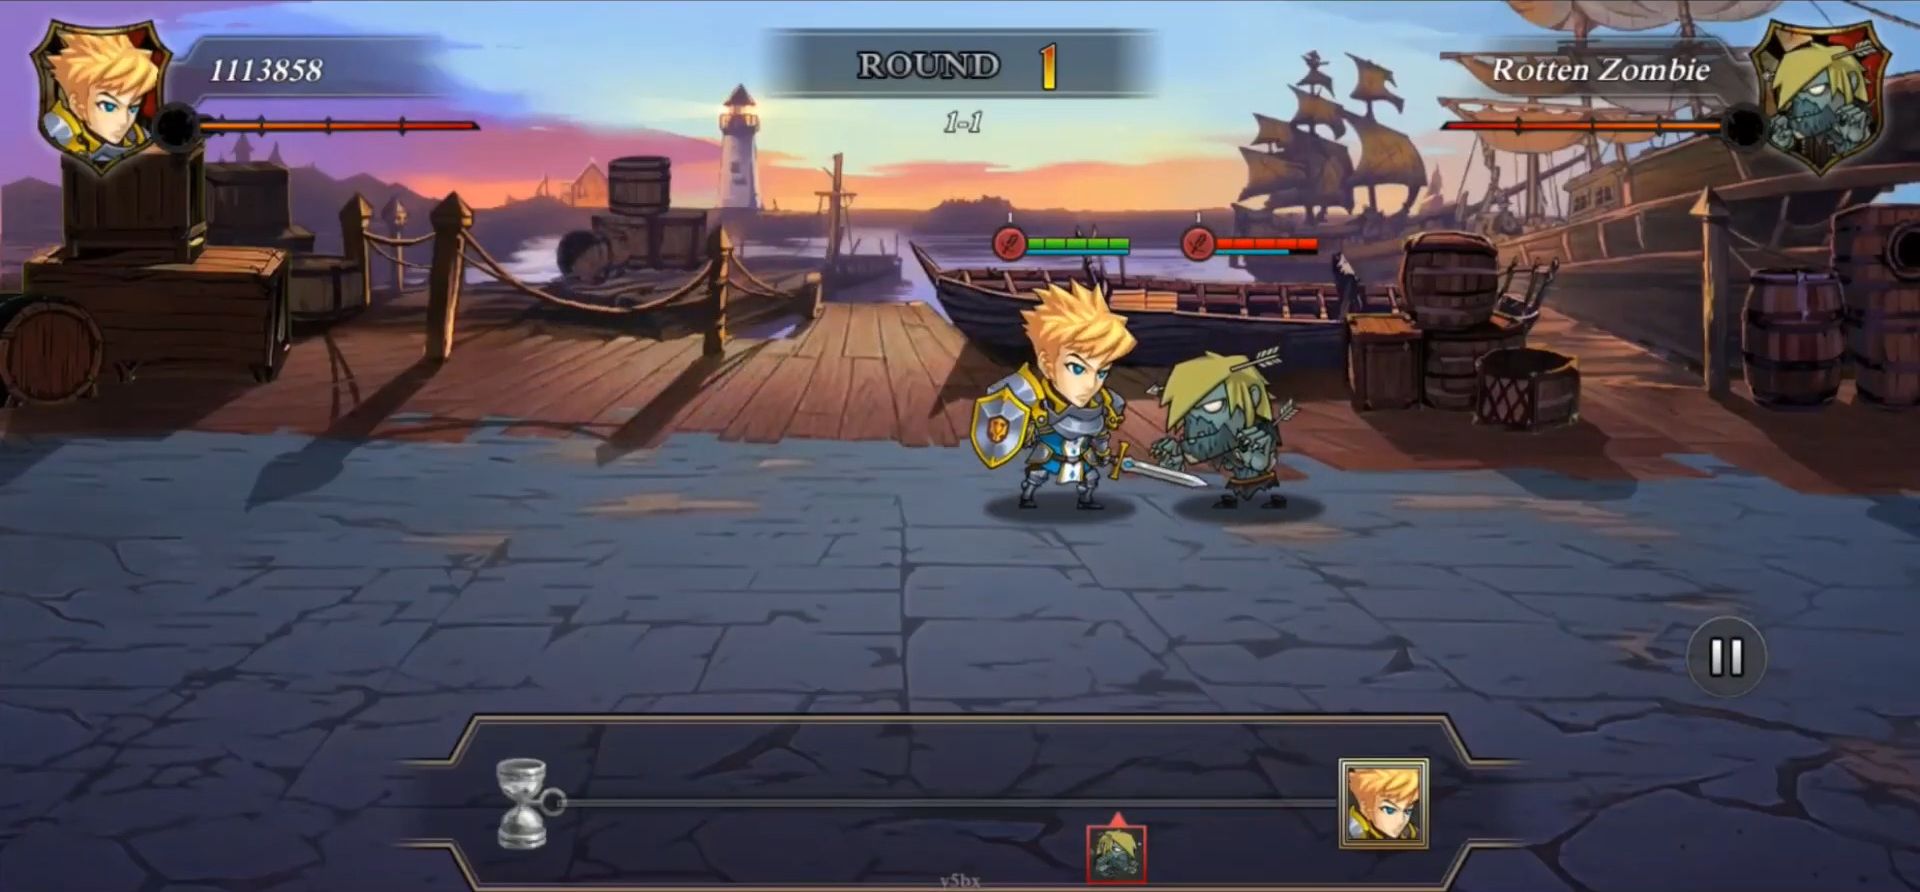 Full version of Android Fantasy game apk Pocket Knights 3 for tablet and phone.